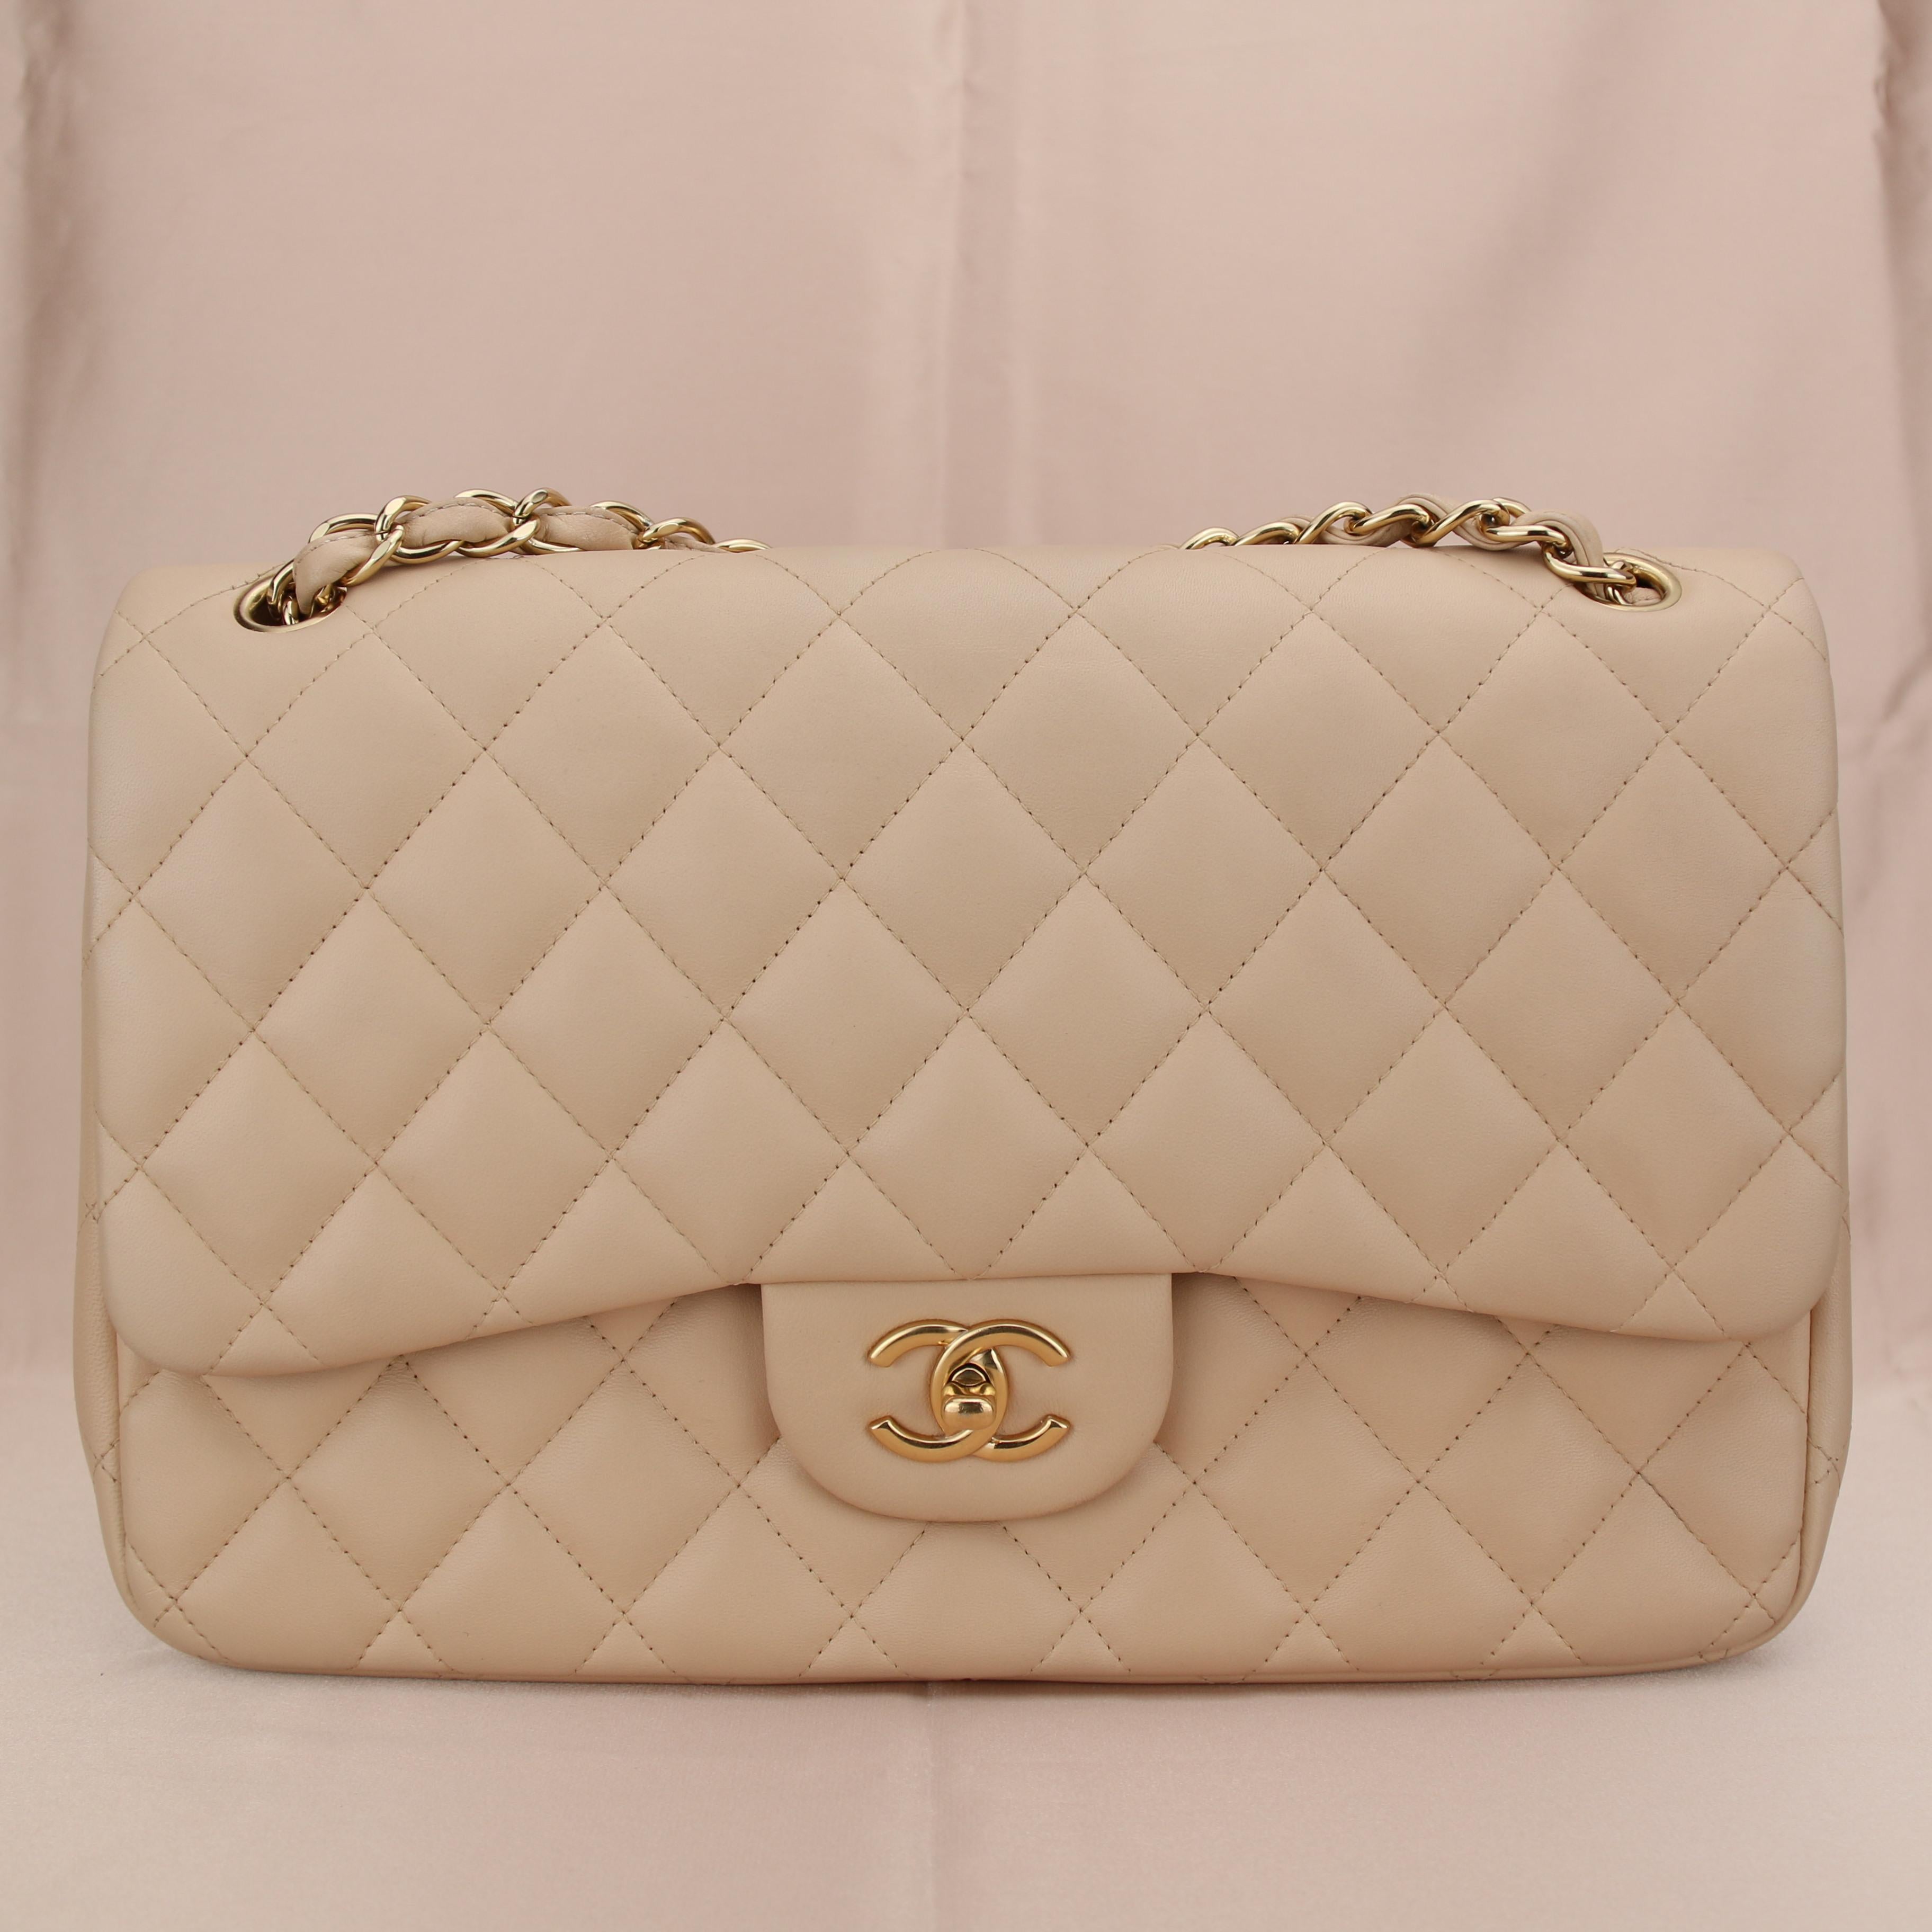 Brand	Chanel
Model	Timeless
Serial No.	16******
Color	Beige
Date	Approx. 2012
Metal	Silver
Material	Lambskin
Measurements	Approx. 20cm H x 30cm W x 10cm D
Condition	Excellent 
Comes with	Chanel Dust bag

If you are interested in any of our